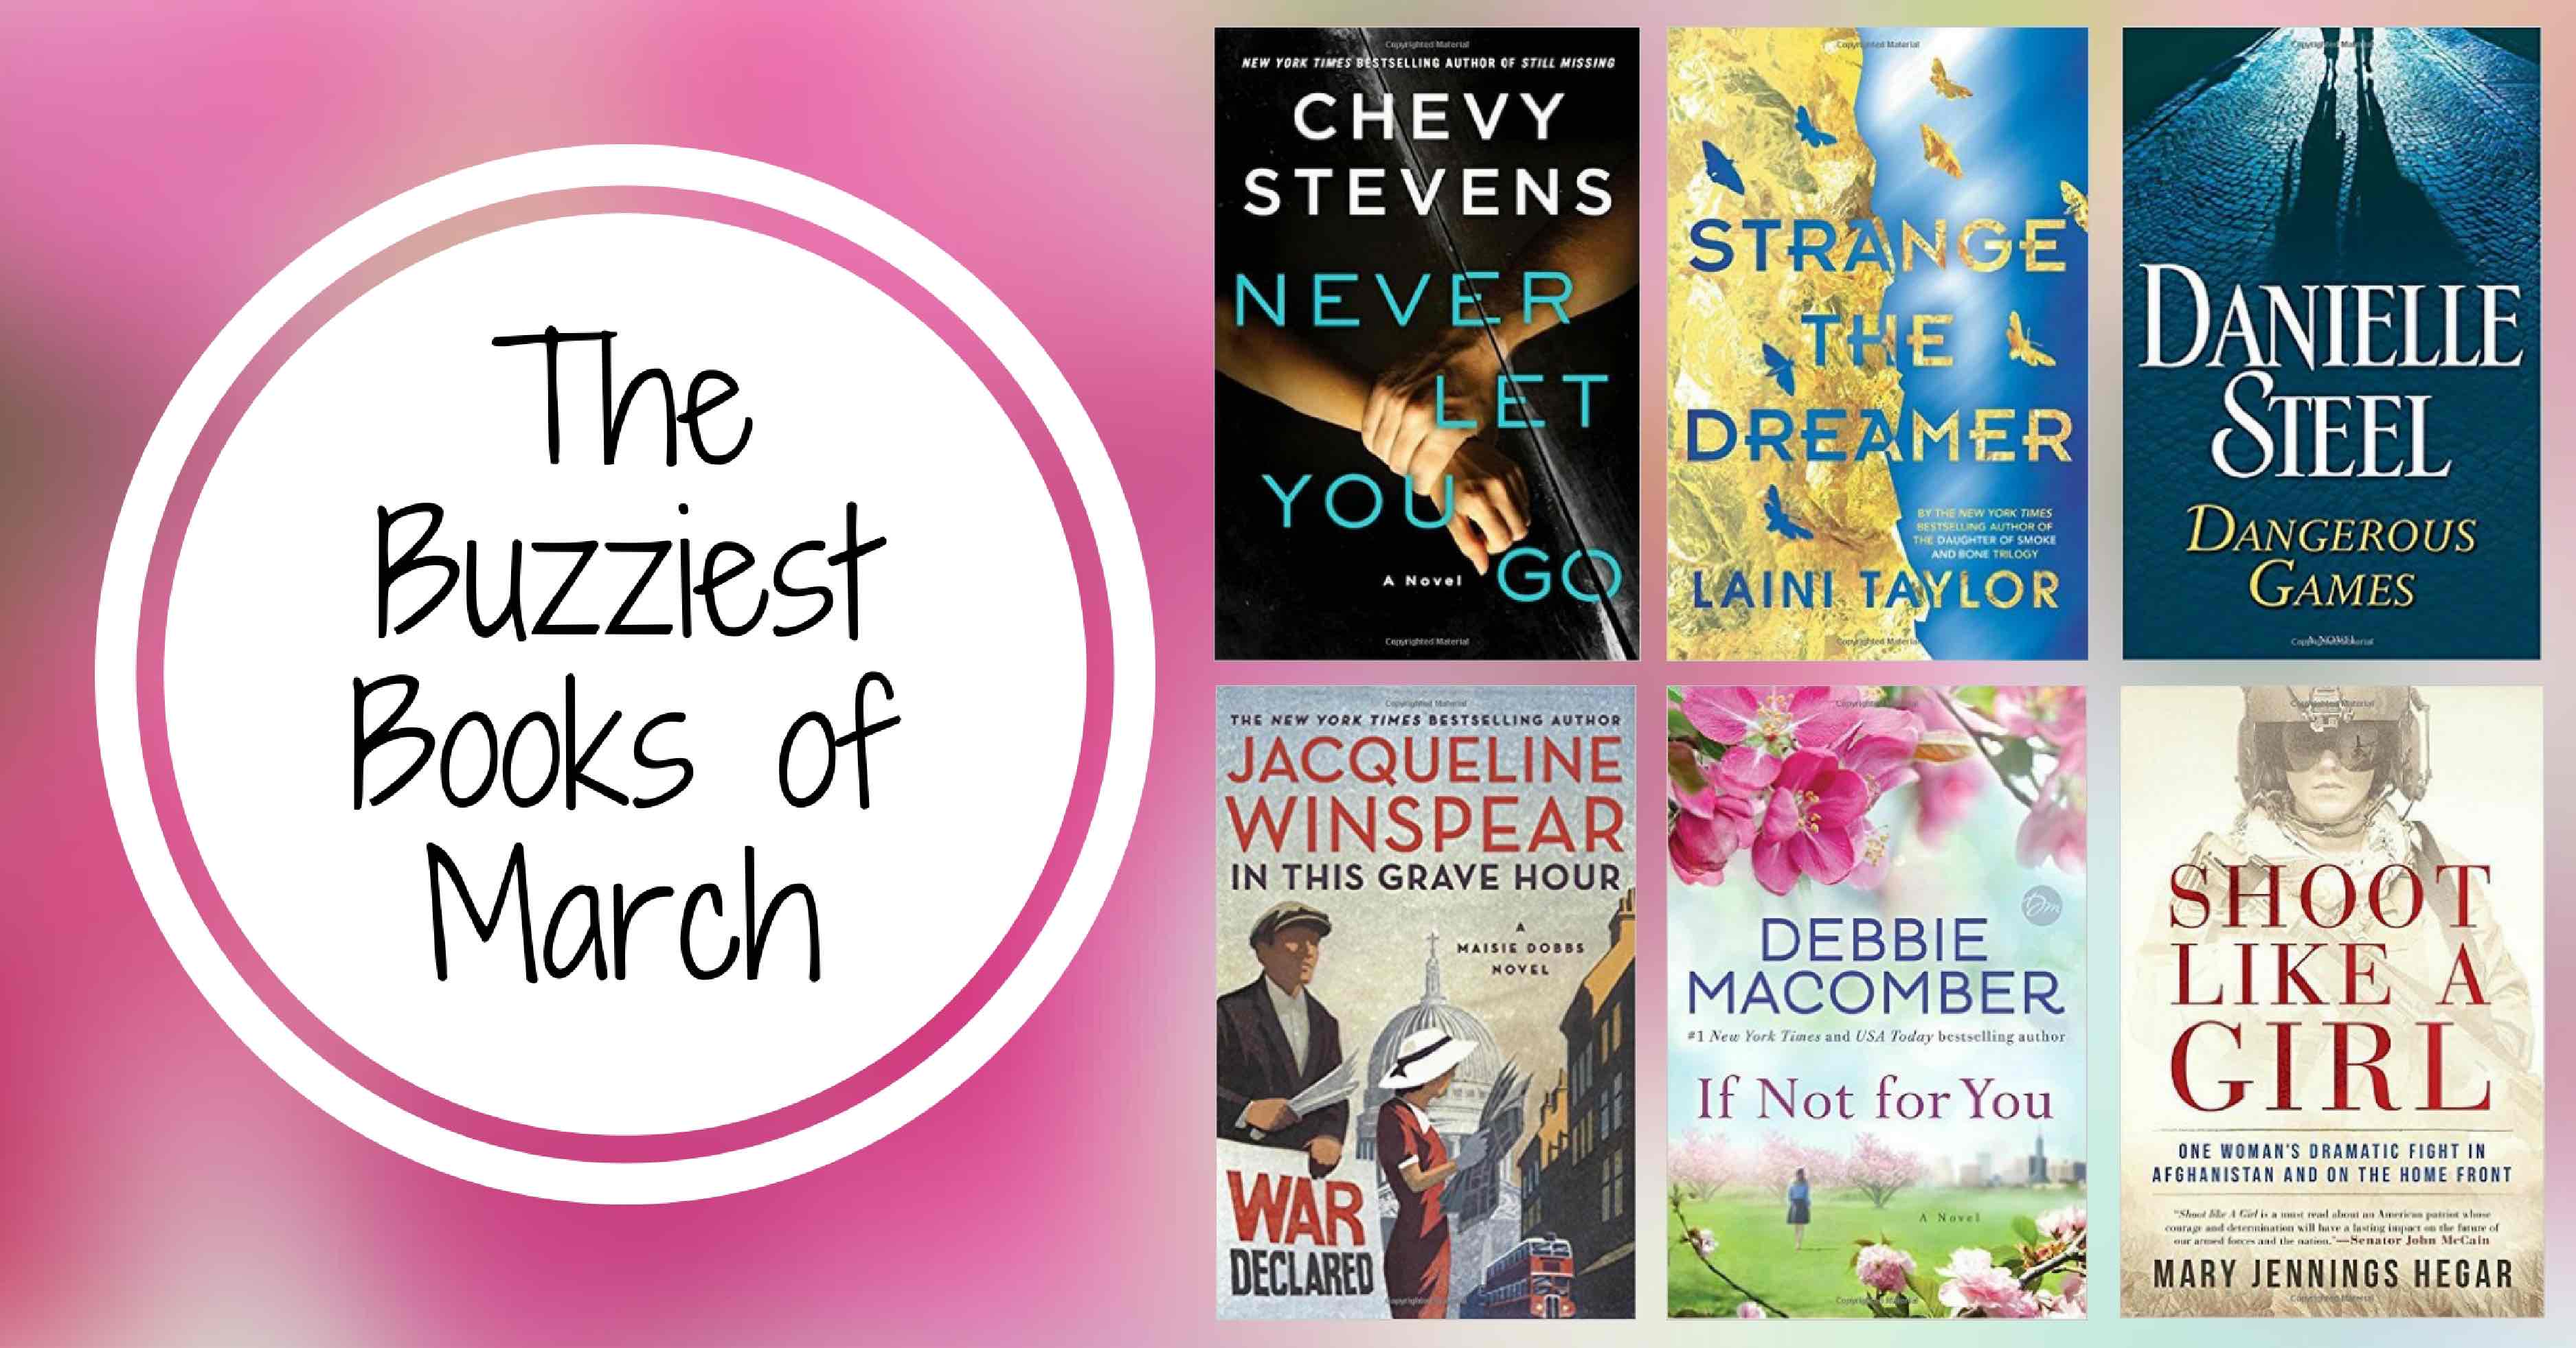 The Buzziest Books of March